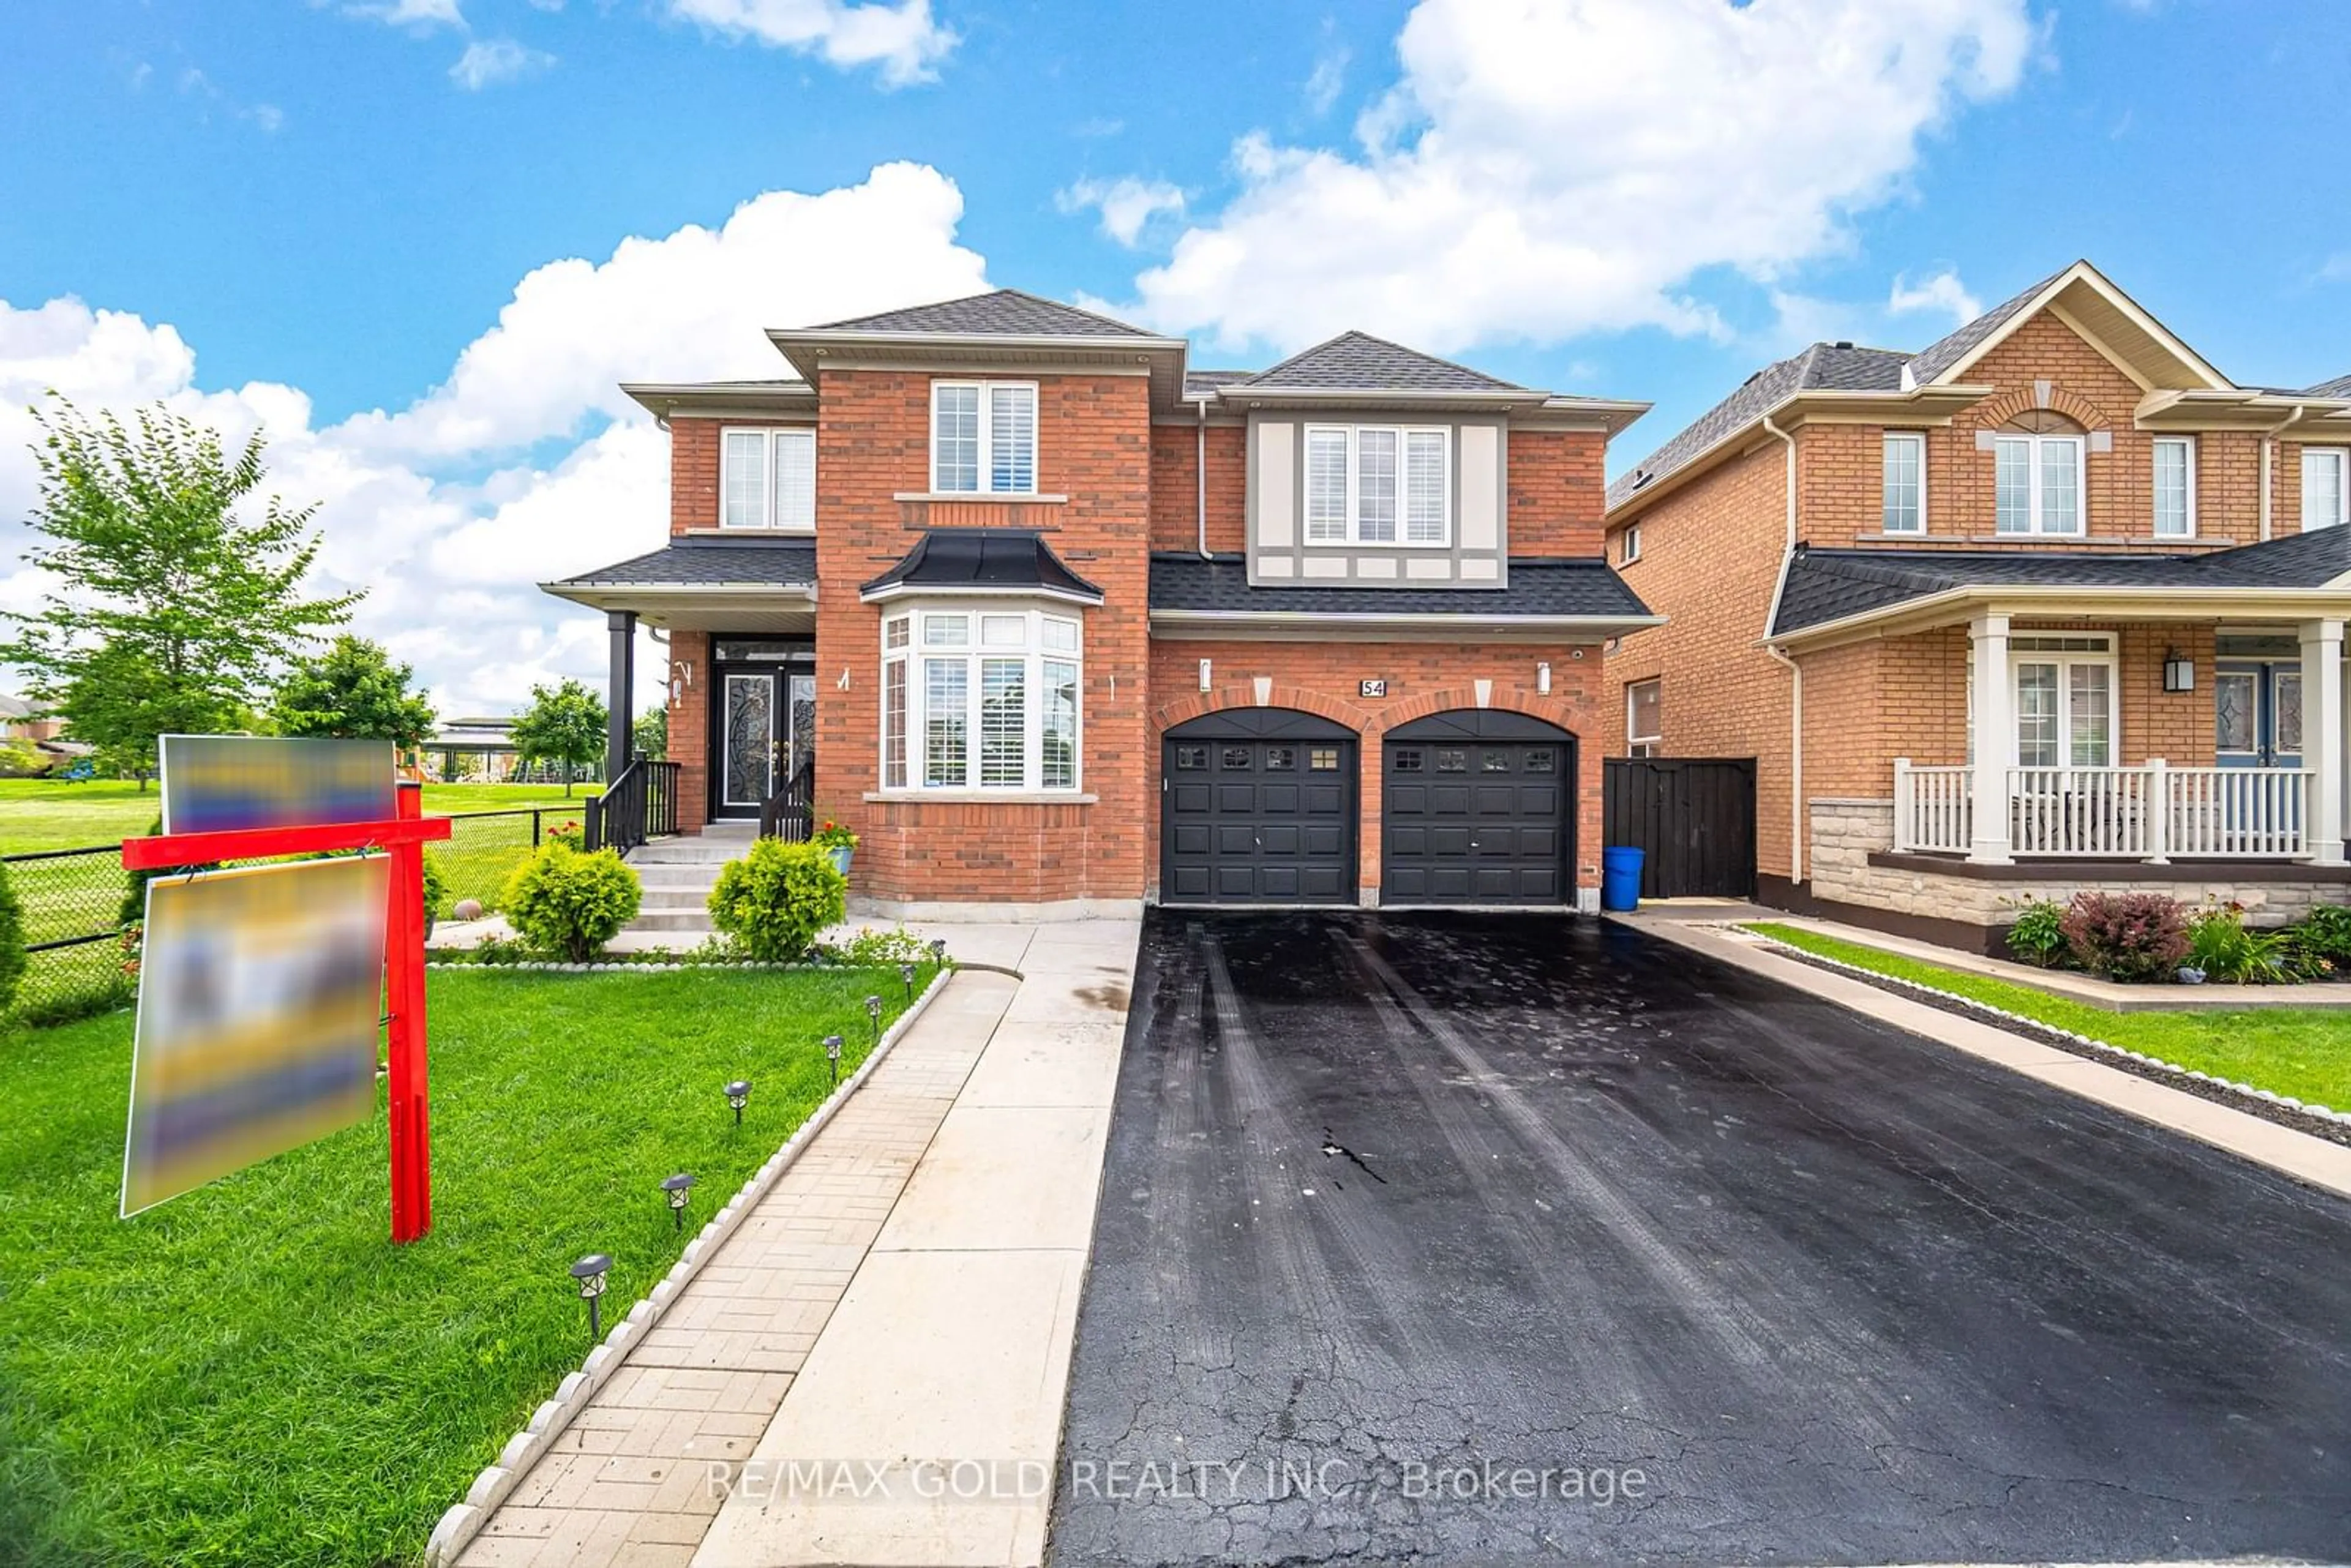 Home with brick exterior material for 54 Quailvalley Dr, Brampton Ontario L6R 0N4